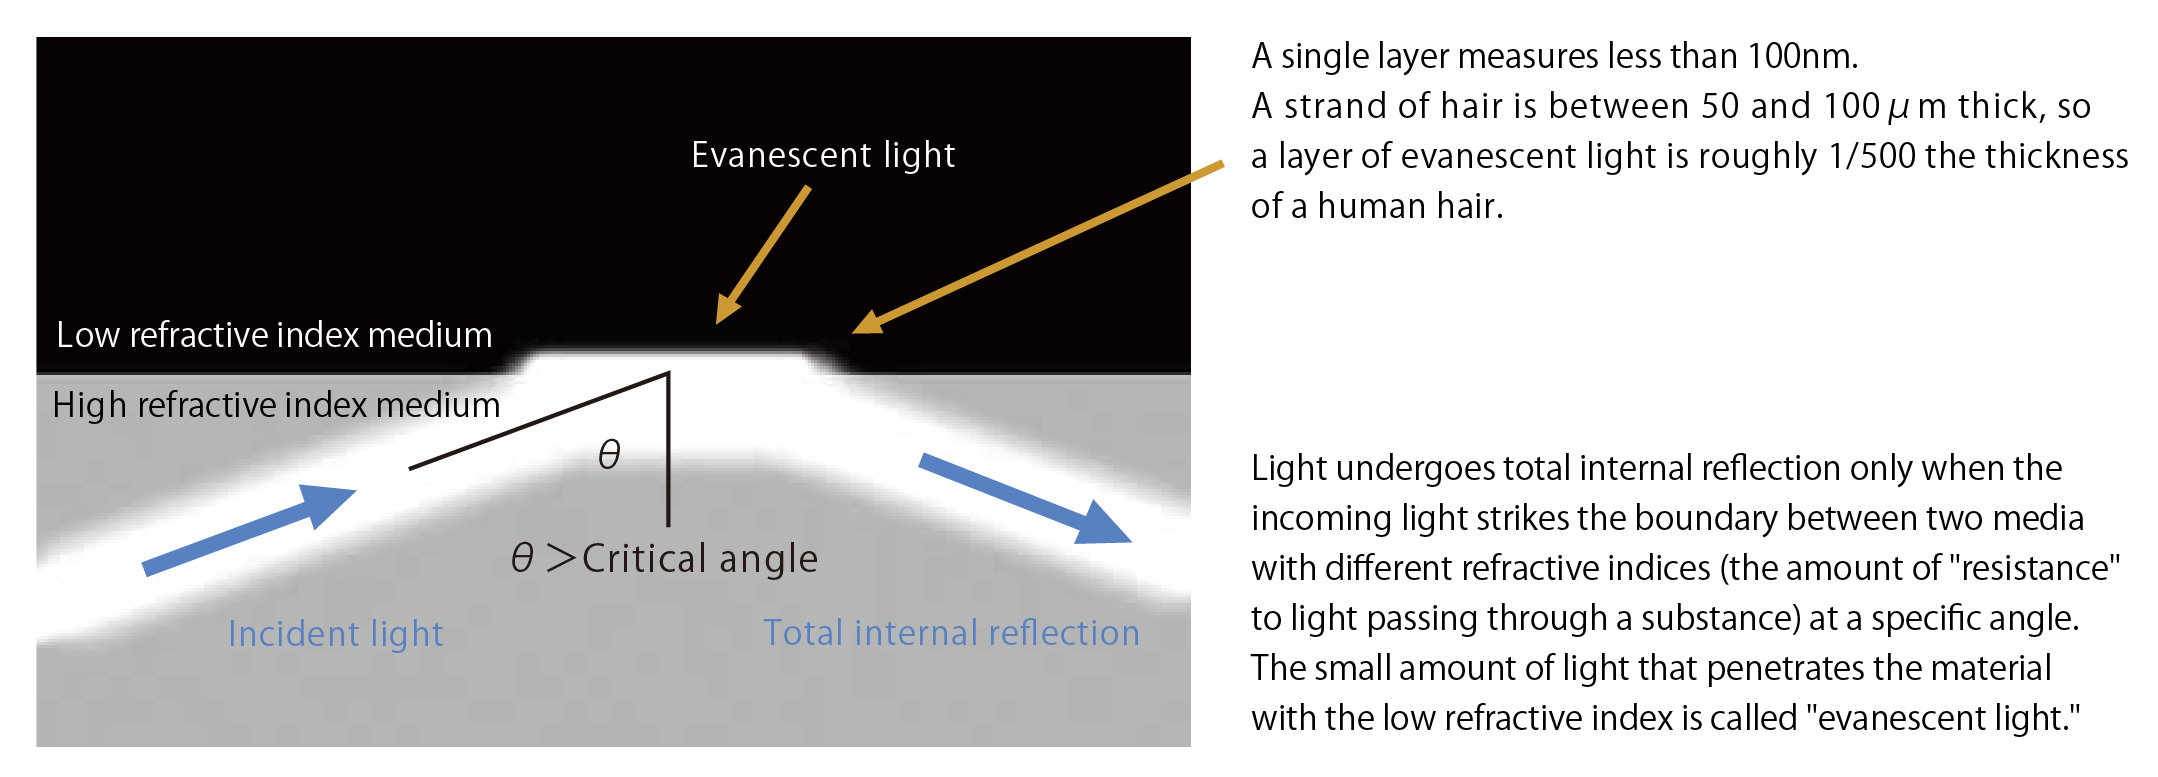 A single layer measures less than 100nm. A strand of hair is between 50 and 100μm thick, so a layer of evanescent light is roughly 1/500 the thickness of a human hair.
Light undergoes total internal reflection only when the incoming light strikes the boundary between two media with different refractive indices (the amount of 